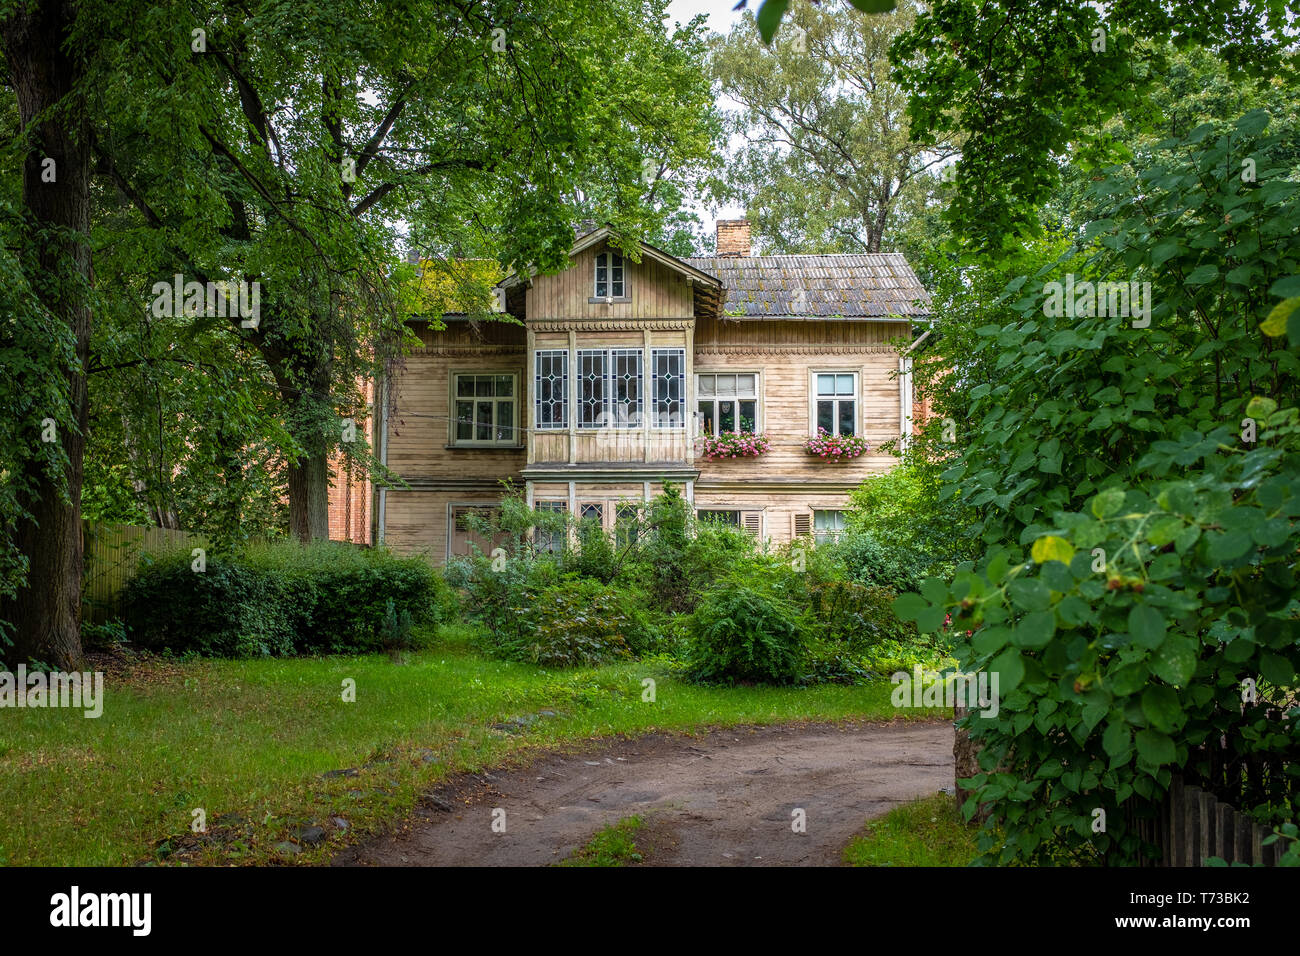 Traditional wooden house of an ancient suburb, set in a luxuriant garden, taken during an overcast morning, Riga, Latvia Stock Photo